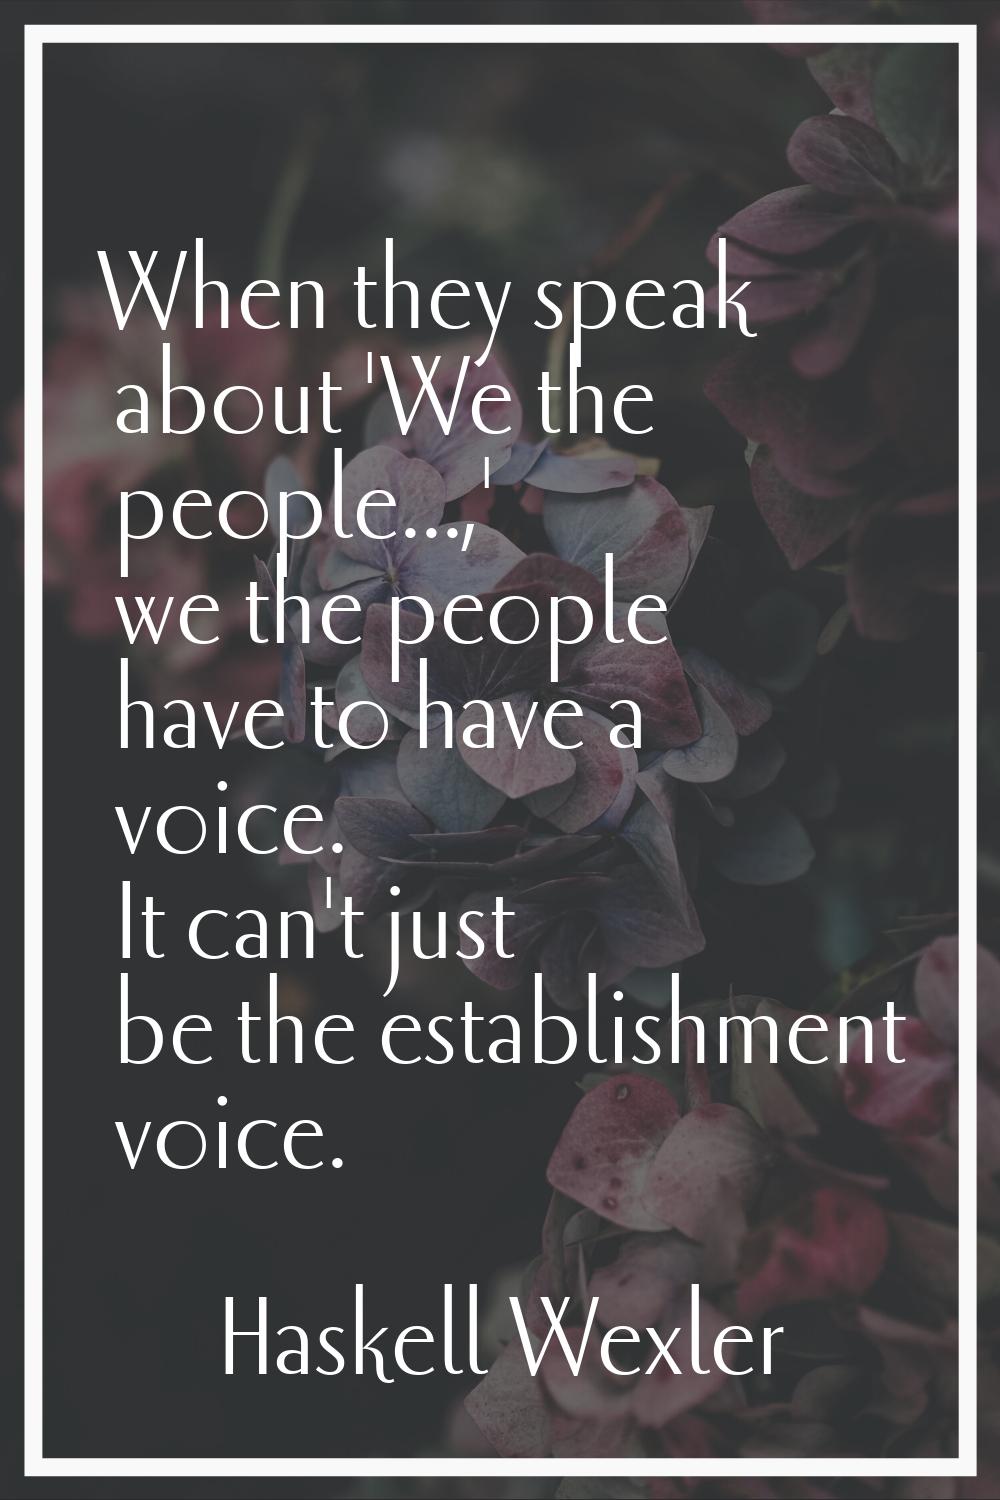 When they speak about 'We the people...,' we the people have to have a voice. It can't just be the 